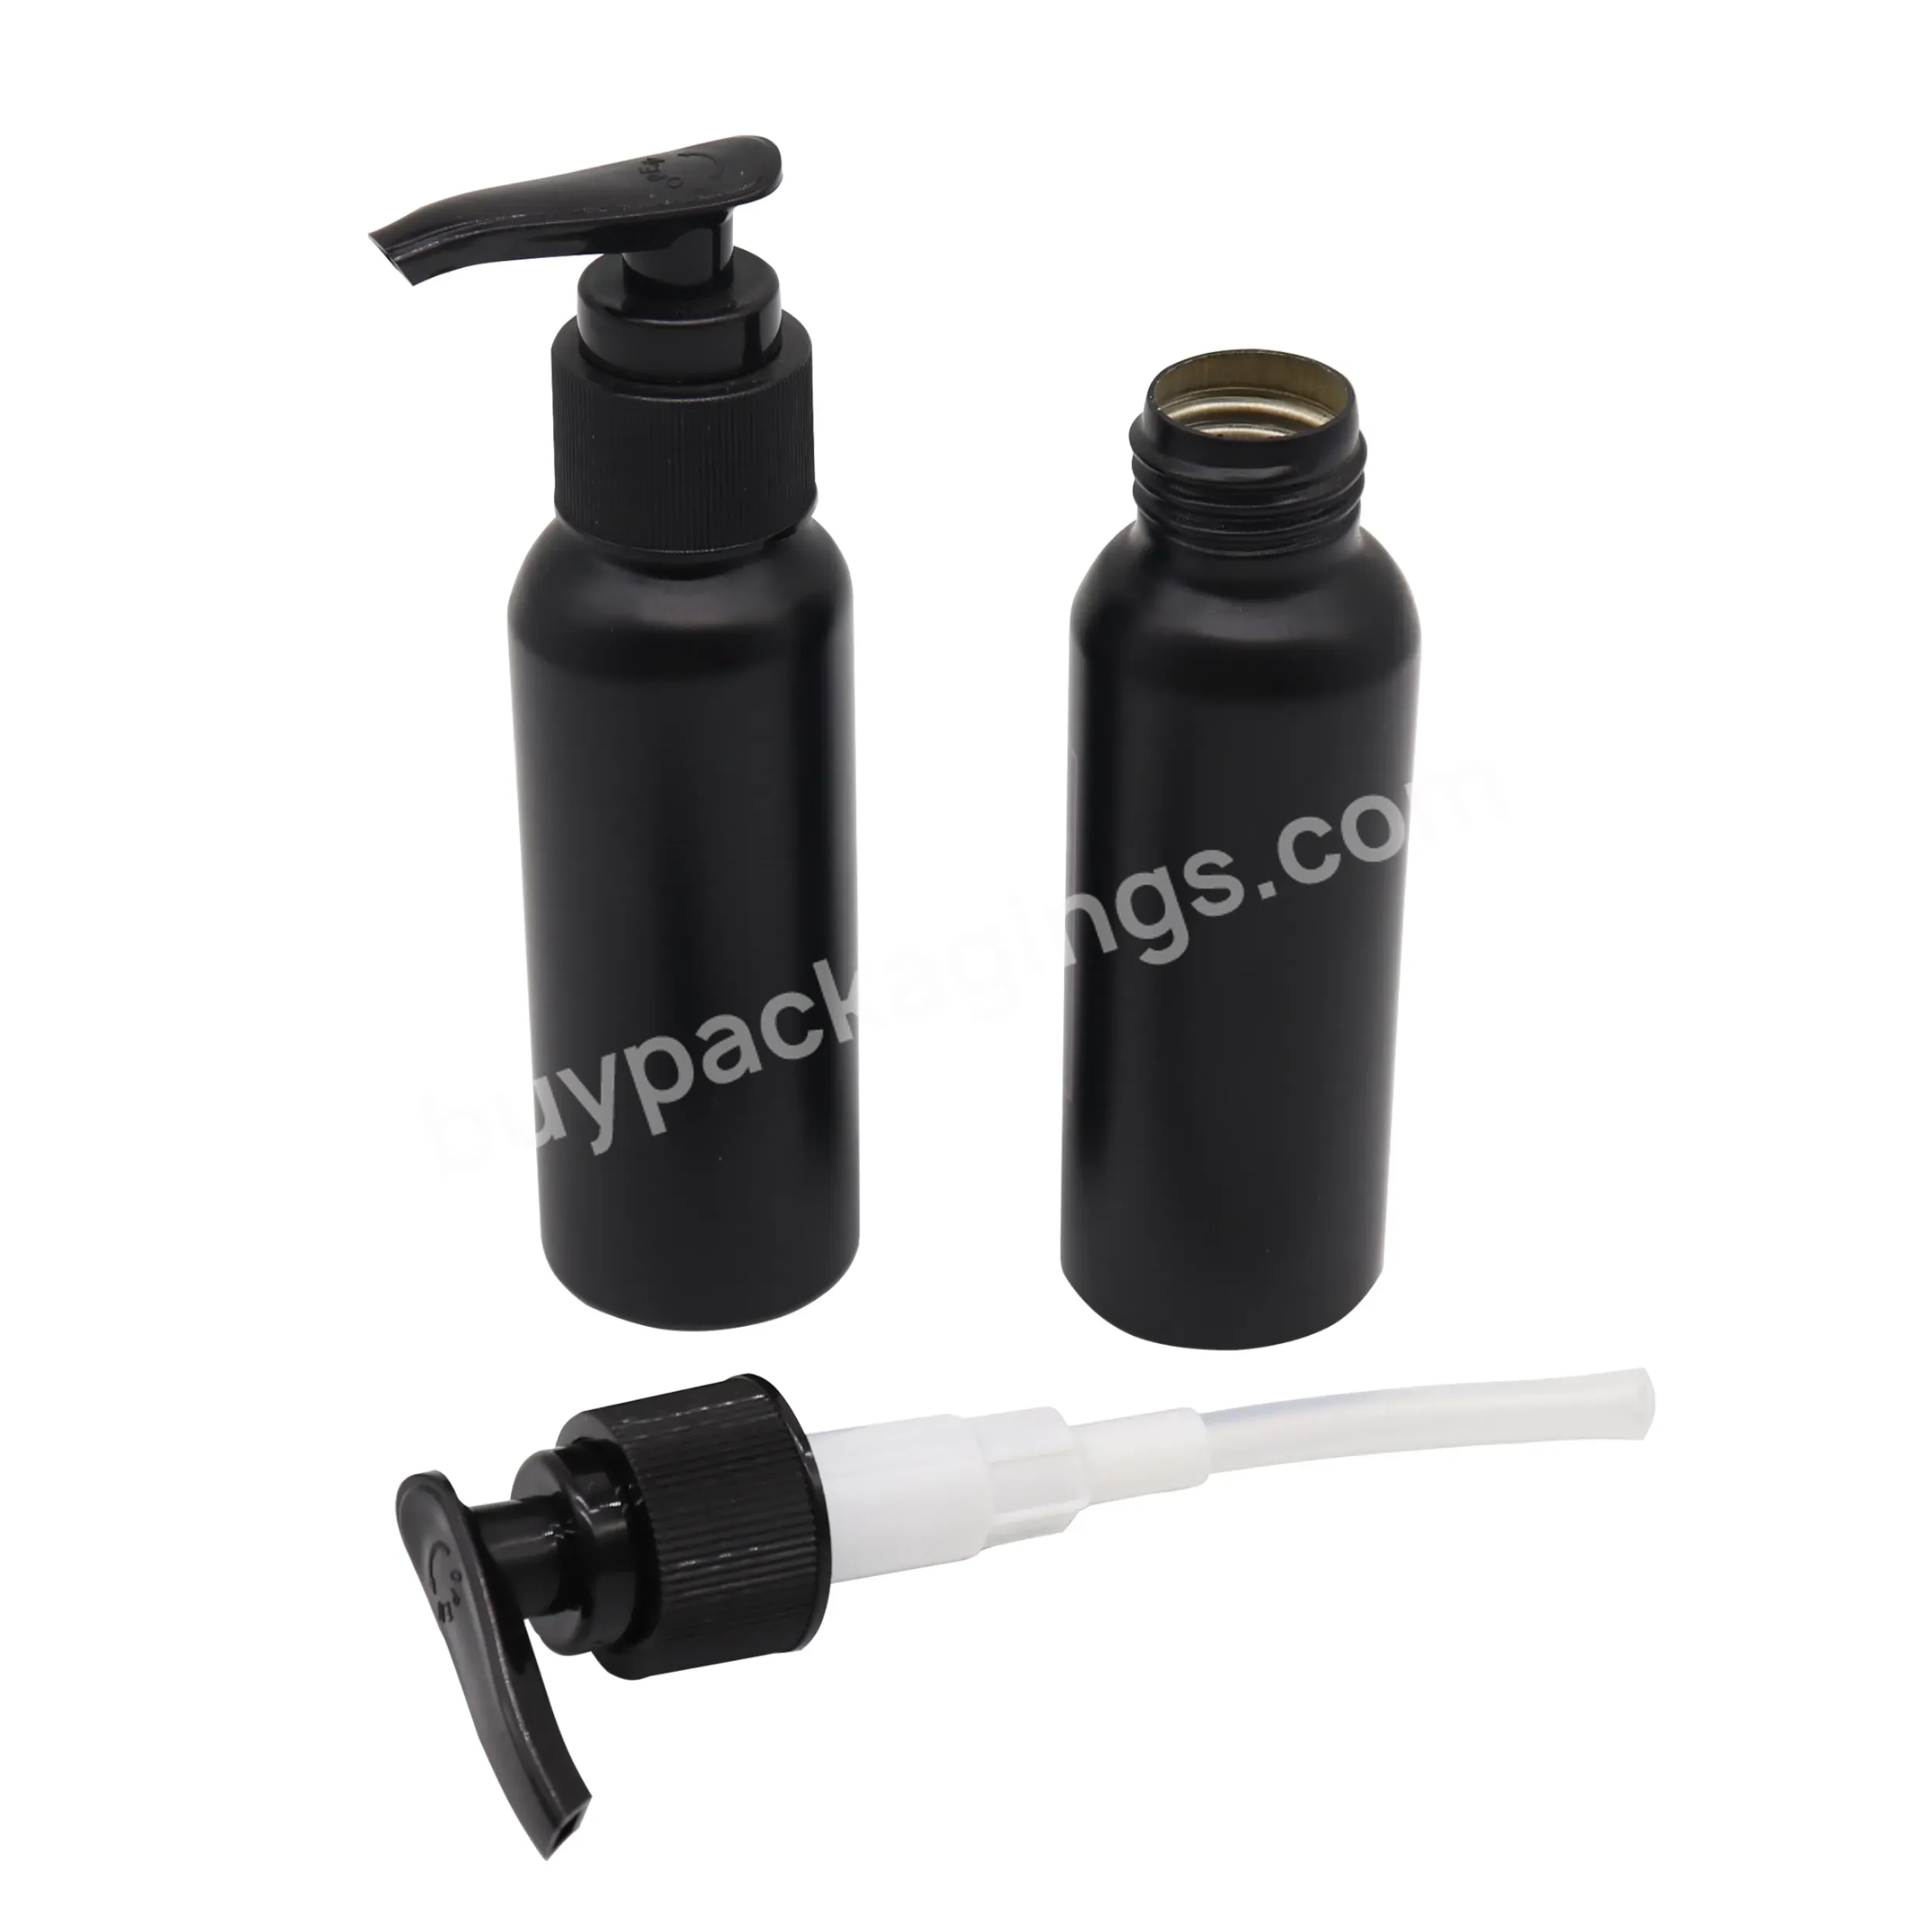 Matte Black Aluminum Cosmetic Bottle With Lotion Pump For Cosmetic Packaging 100ml - Buy 100ml Black Aluminum Bottle,Aluminum Bottle With Pump,Aluminum Cosmetic Bottle.